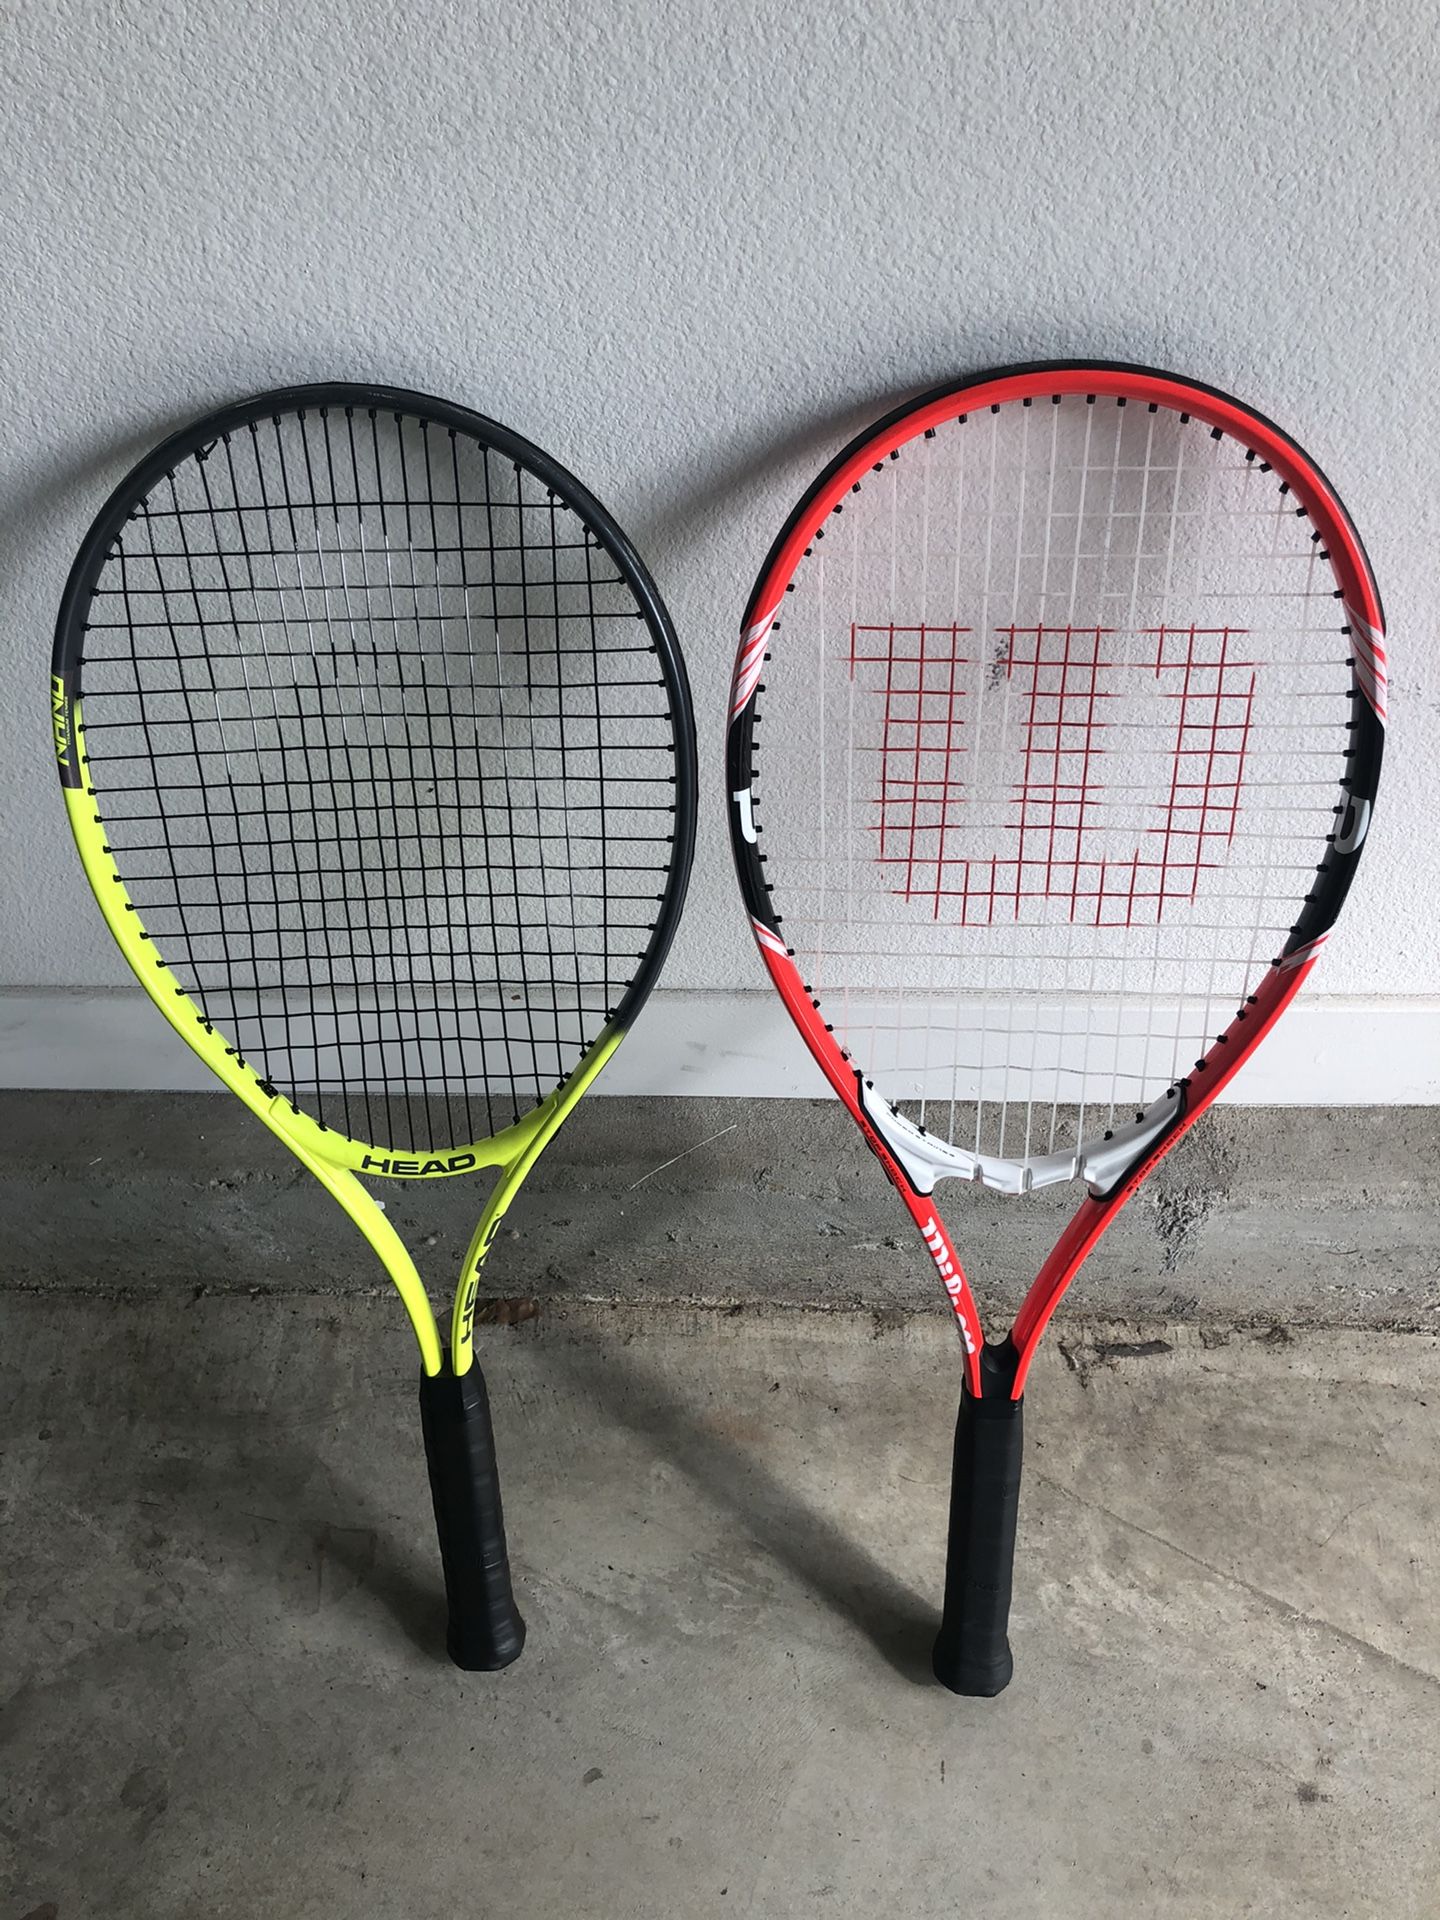 Two adult tennis rackets